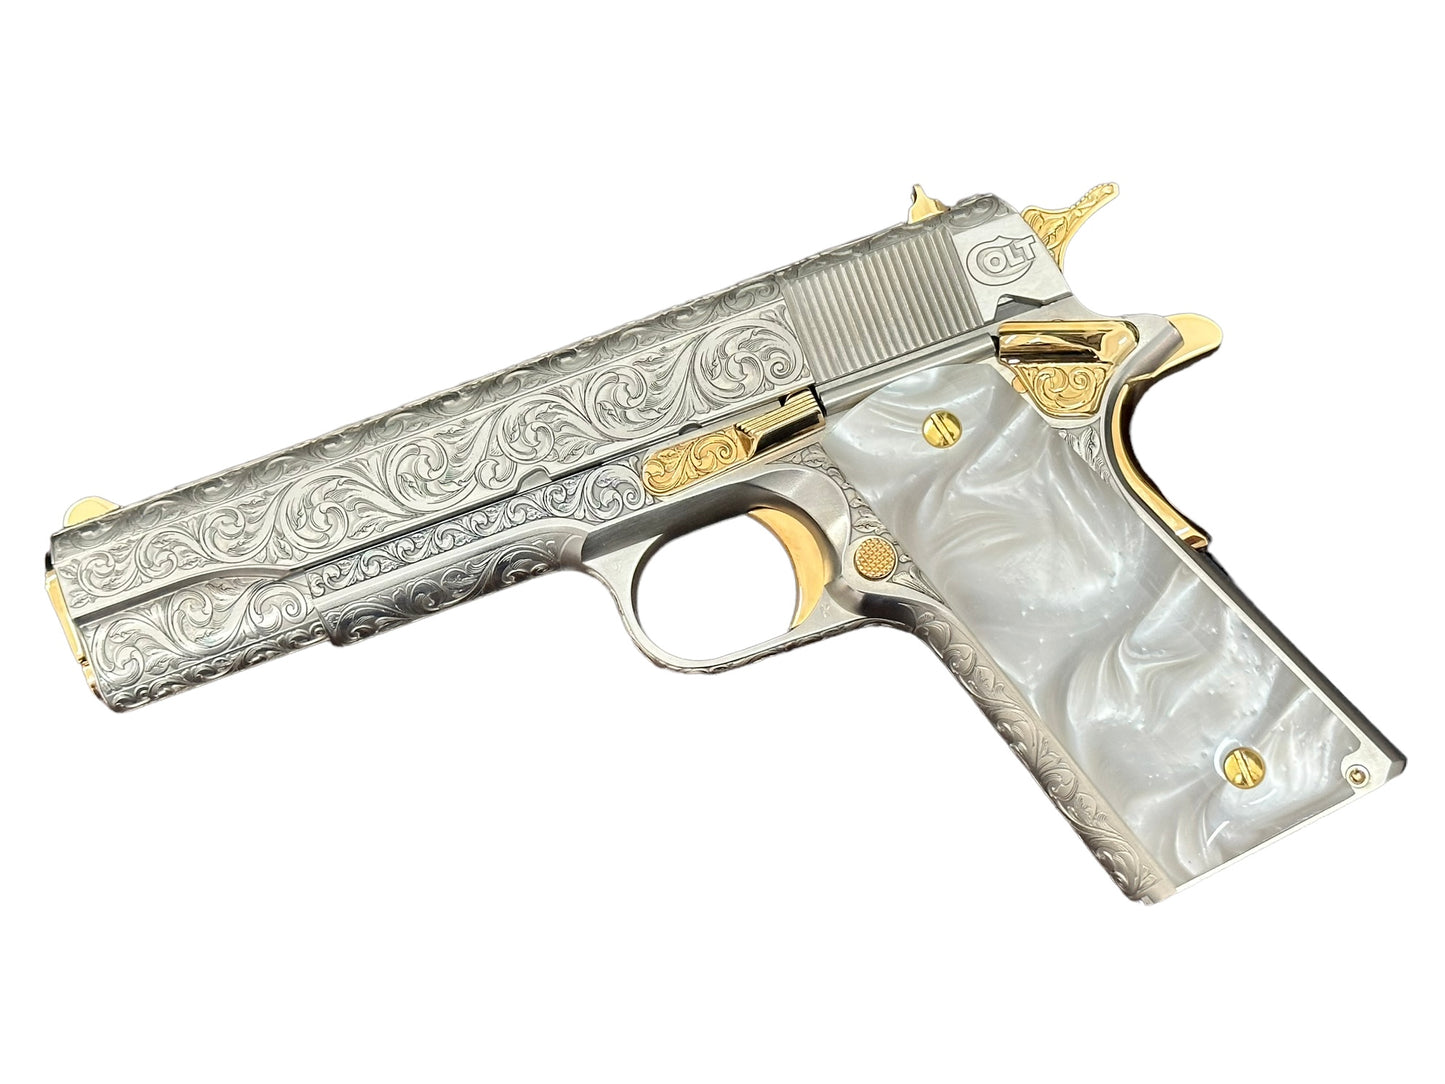 COLT CUSTOM 1911 FULLY ENGRAVED BRUSH NICKEL FINISH WITH 24K GOLD ACCENTS